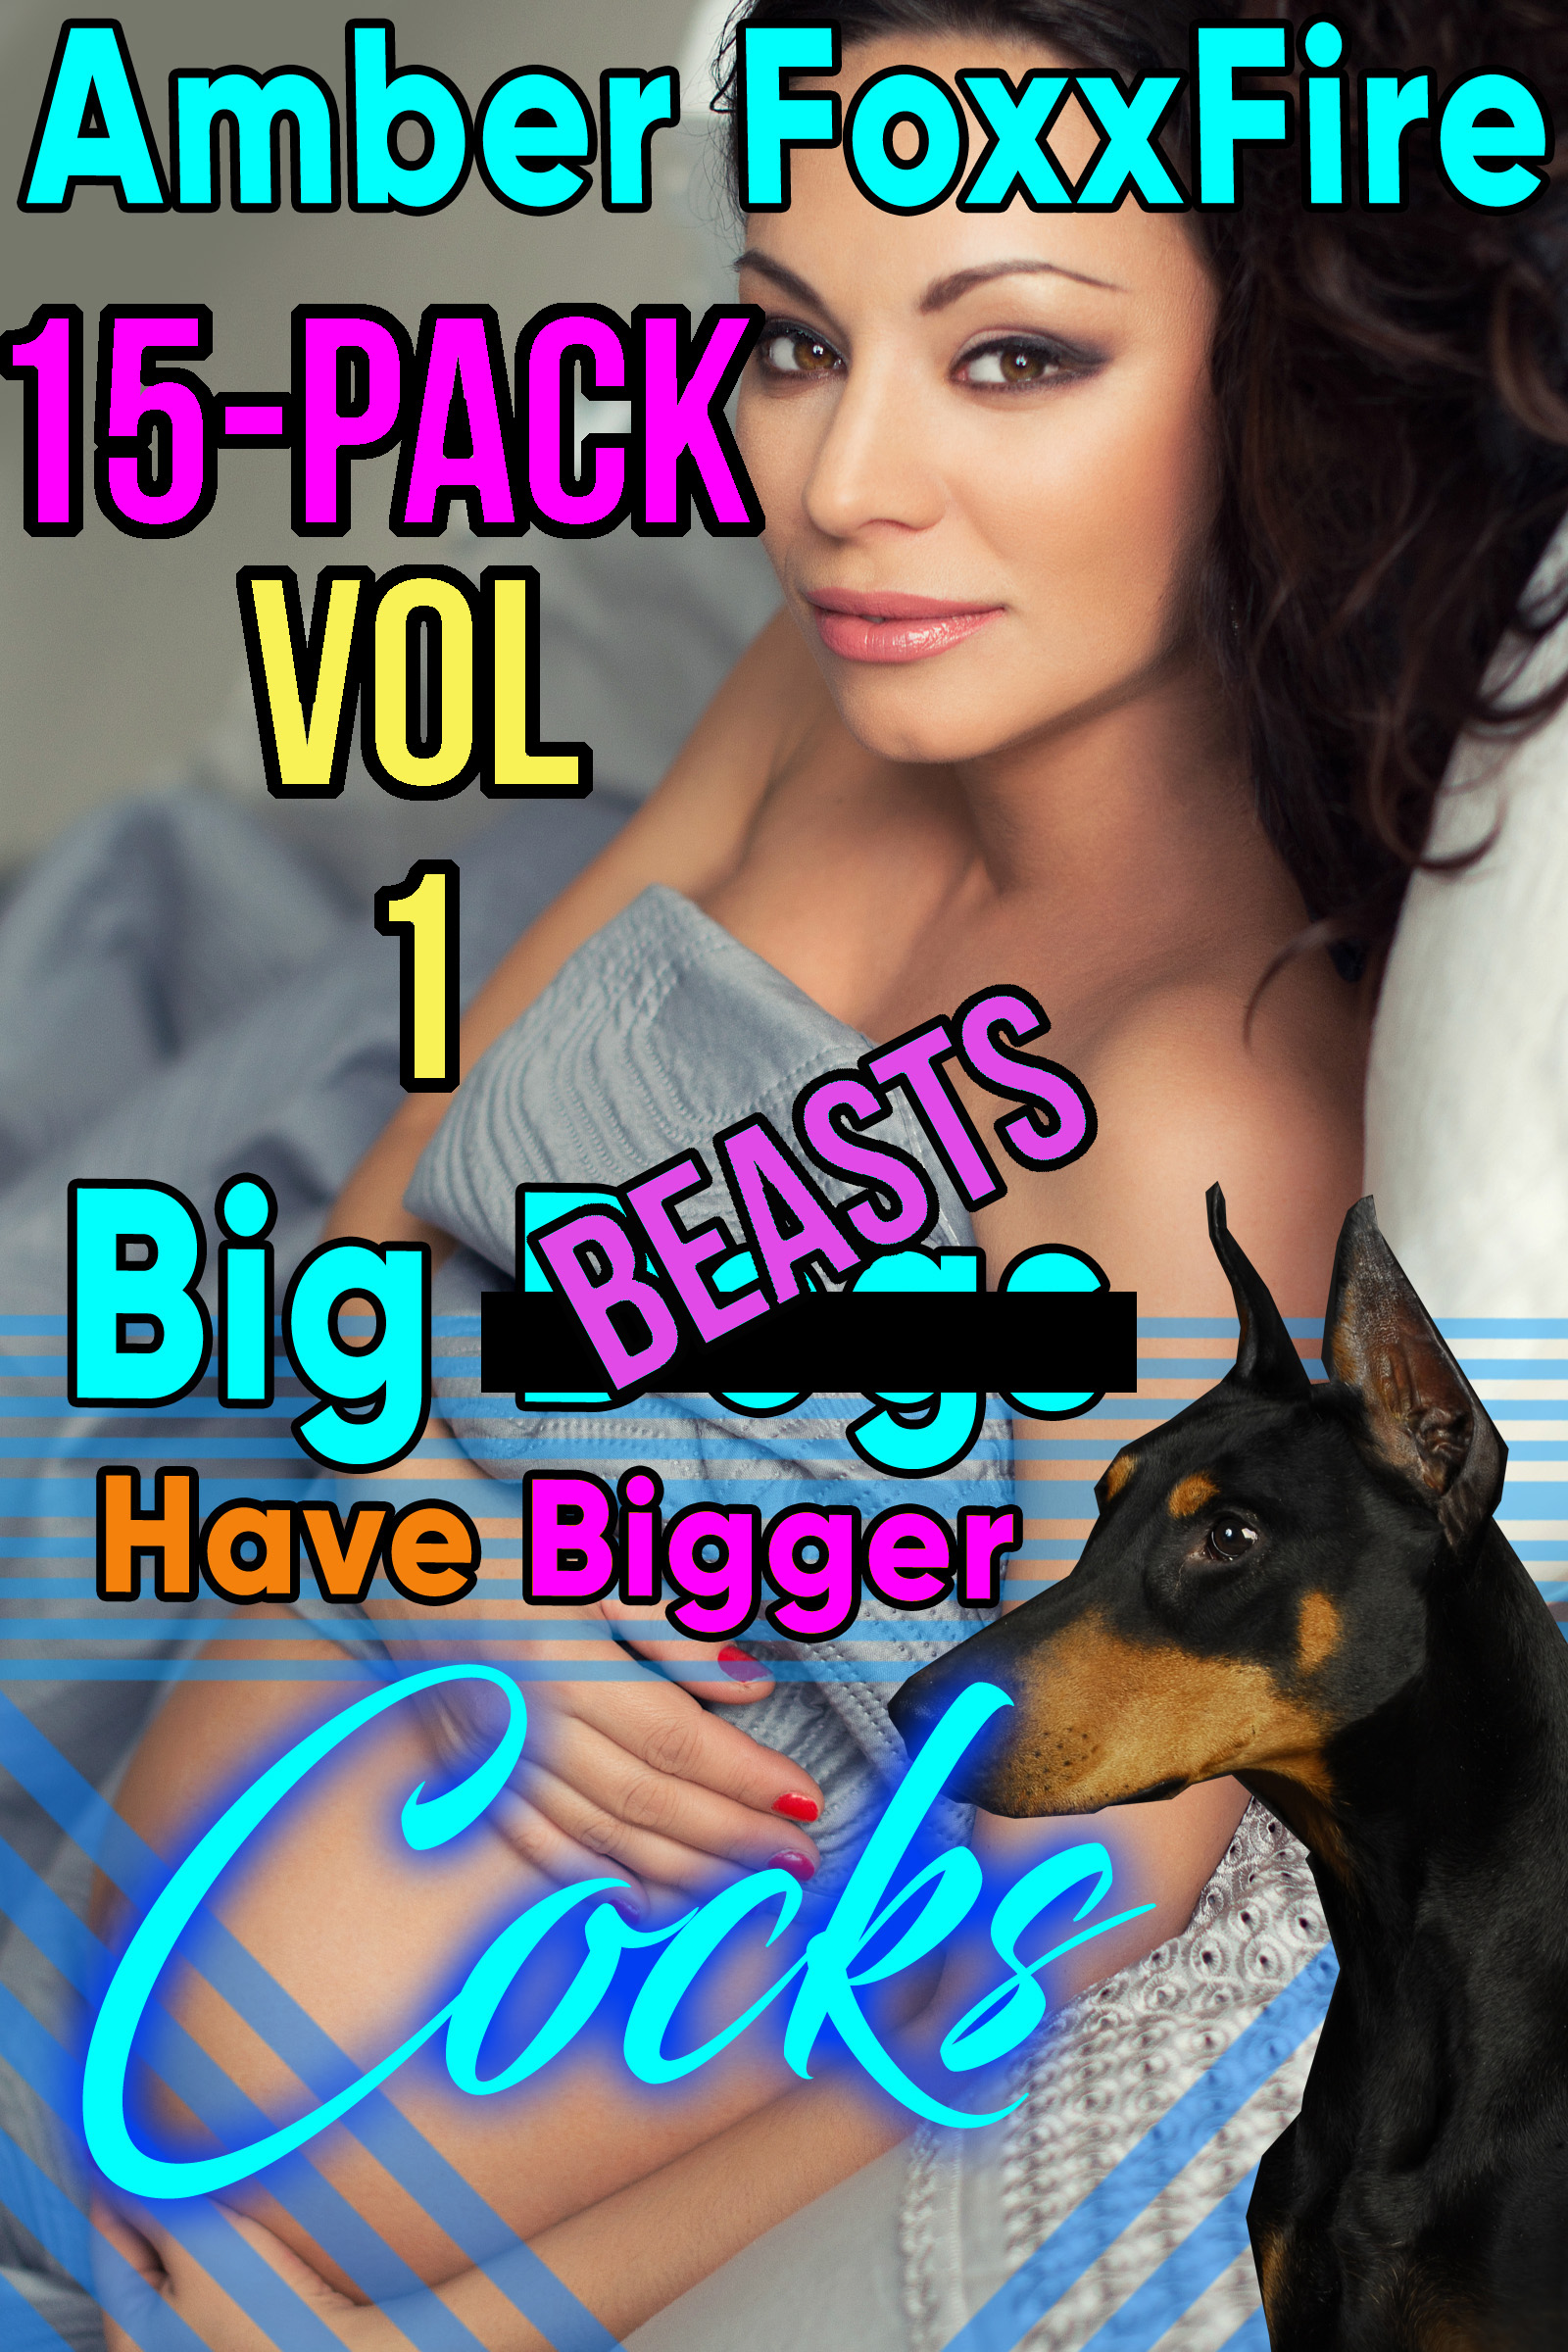 Big Beasts Have Bigger Cocks 15-Pack Vol 1, an Ebook by Amber FoxxFire.